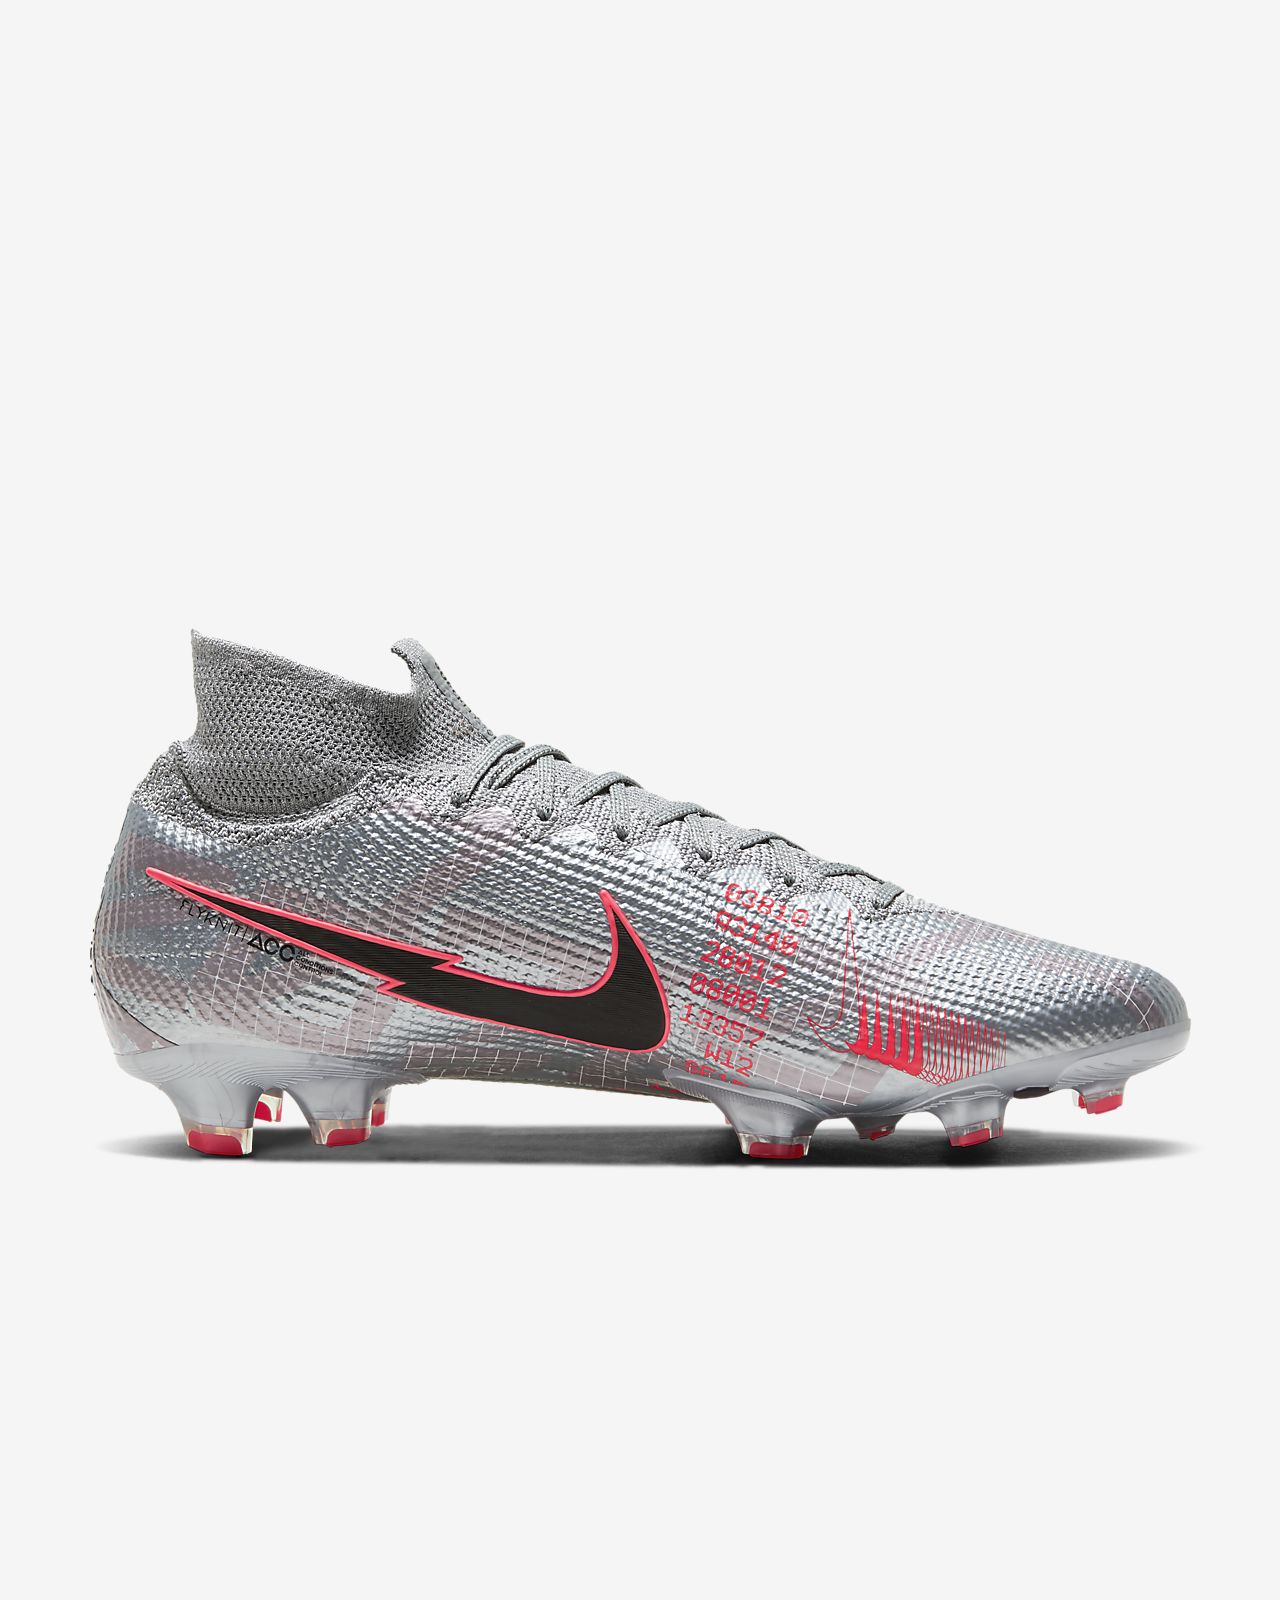 Nike Mercurial Superfly 7 Elite Archives Soccer Reviews For.